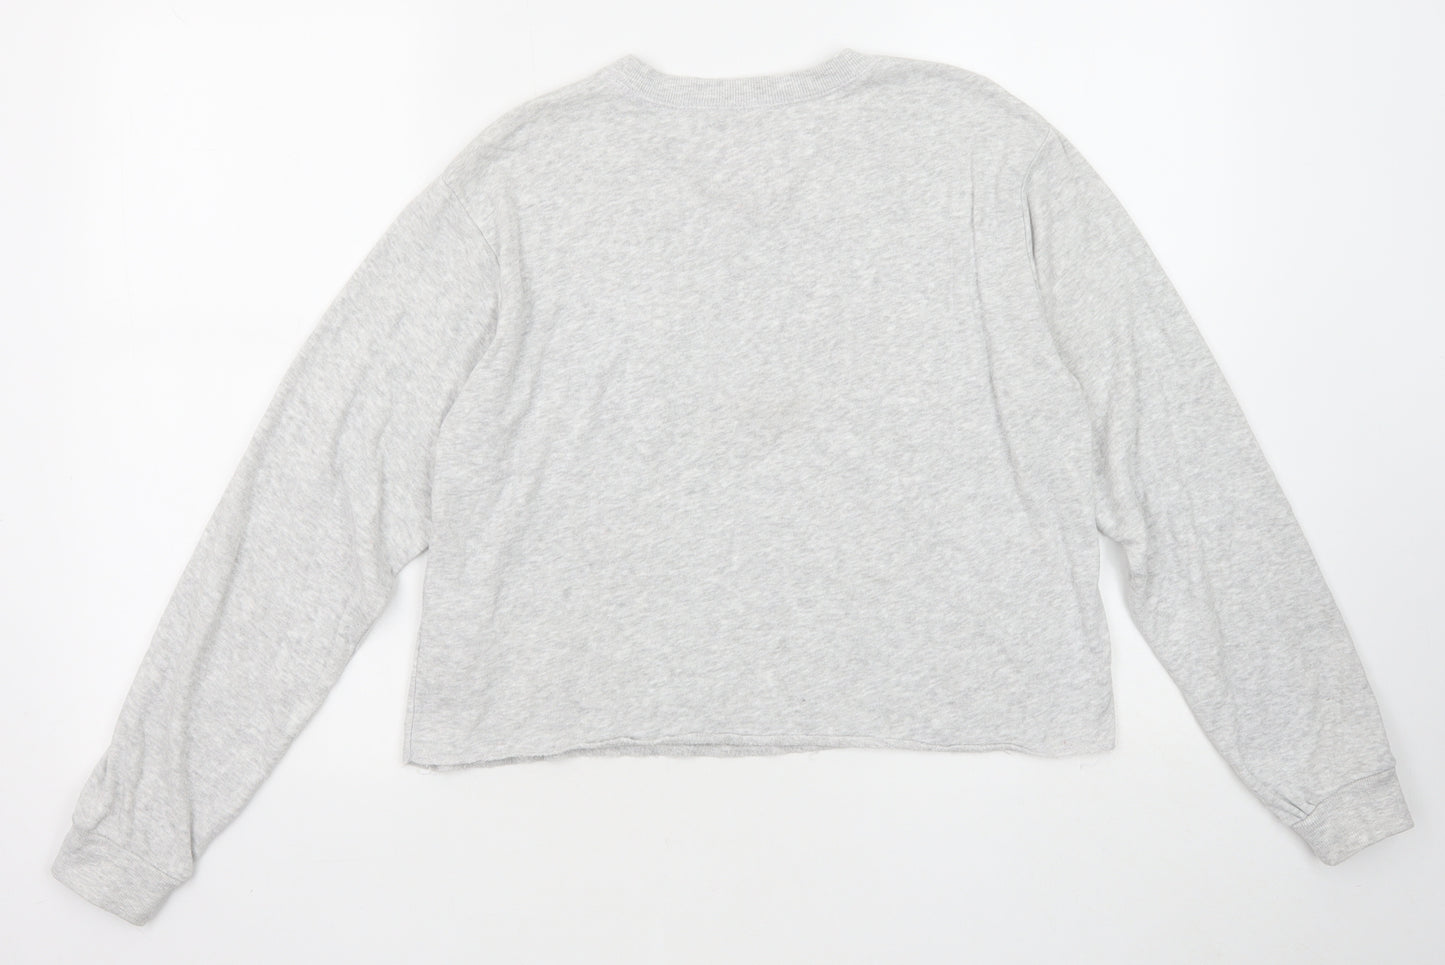 Pull&Bear Womens Grey Cotton Pullover Sweatshirt Size S Pullover - Mermaids League